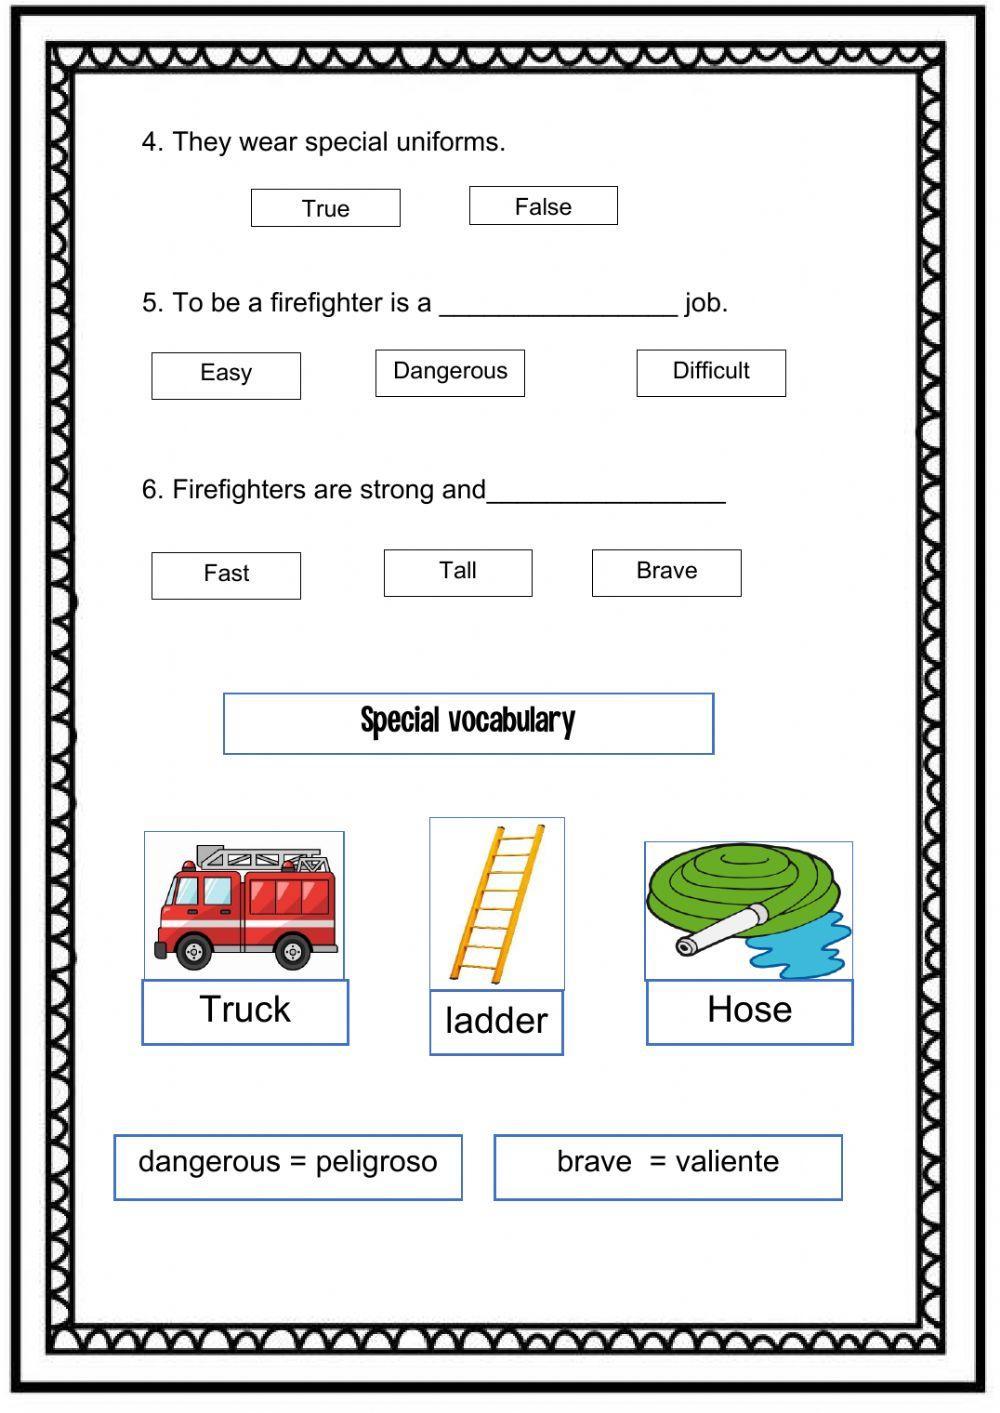 Reading comprehension - Firefighters